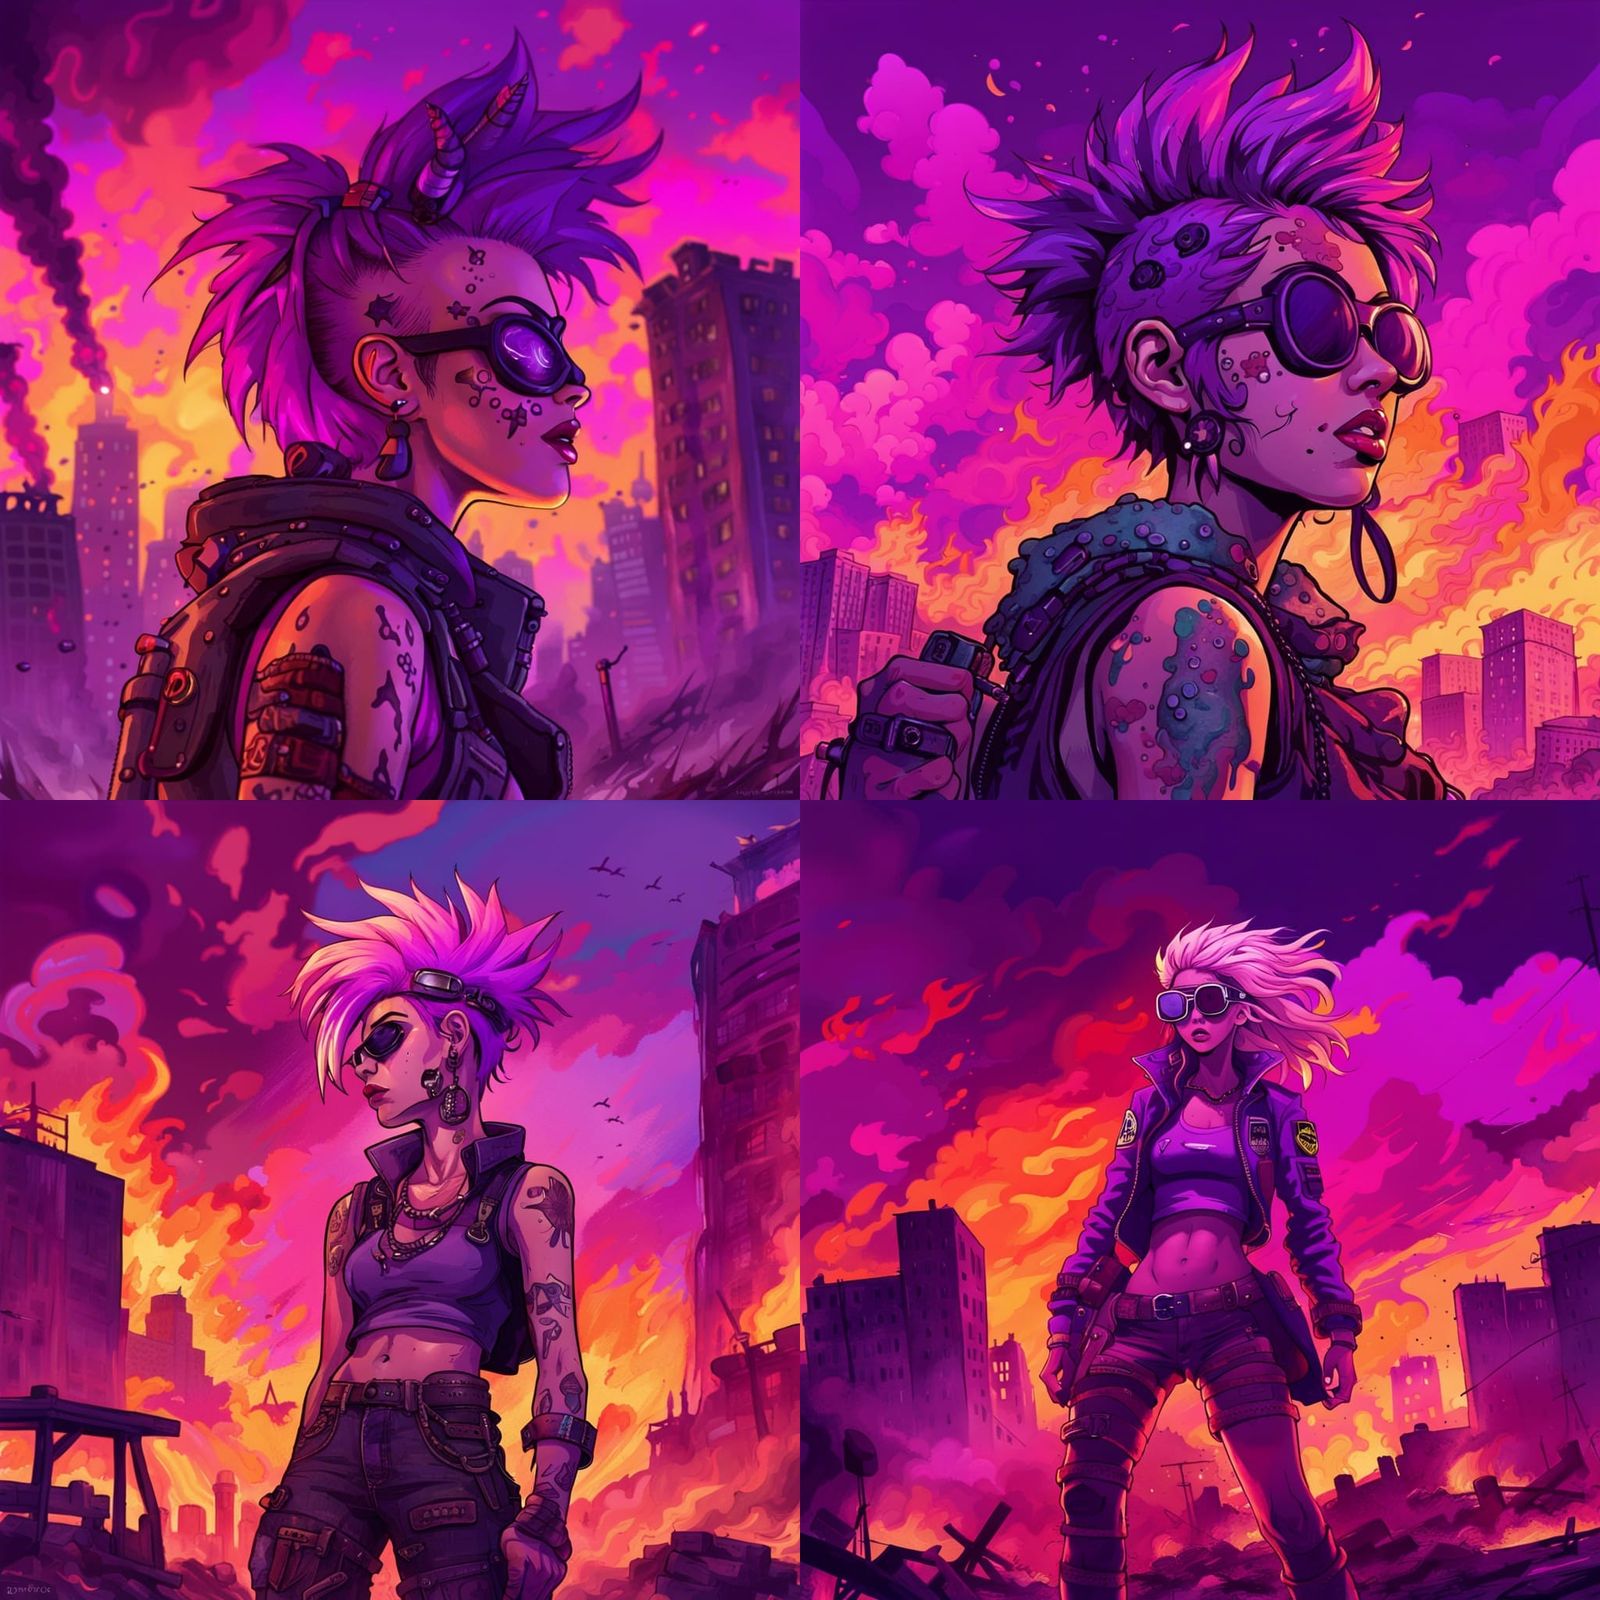 Psychedelic tank girl, burning buildings, sky on fire. Post-apocalyptic purple epic background